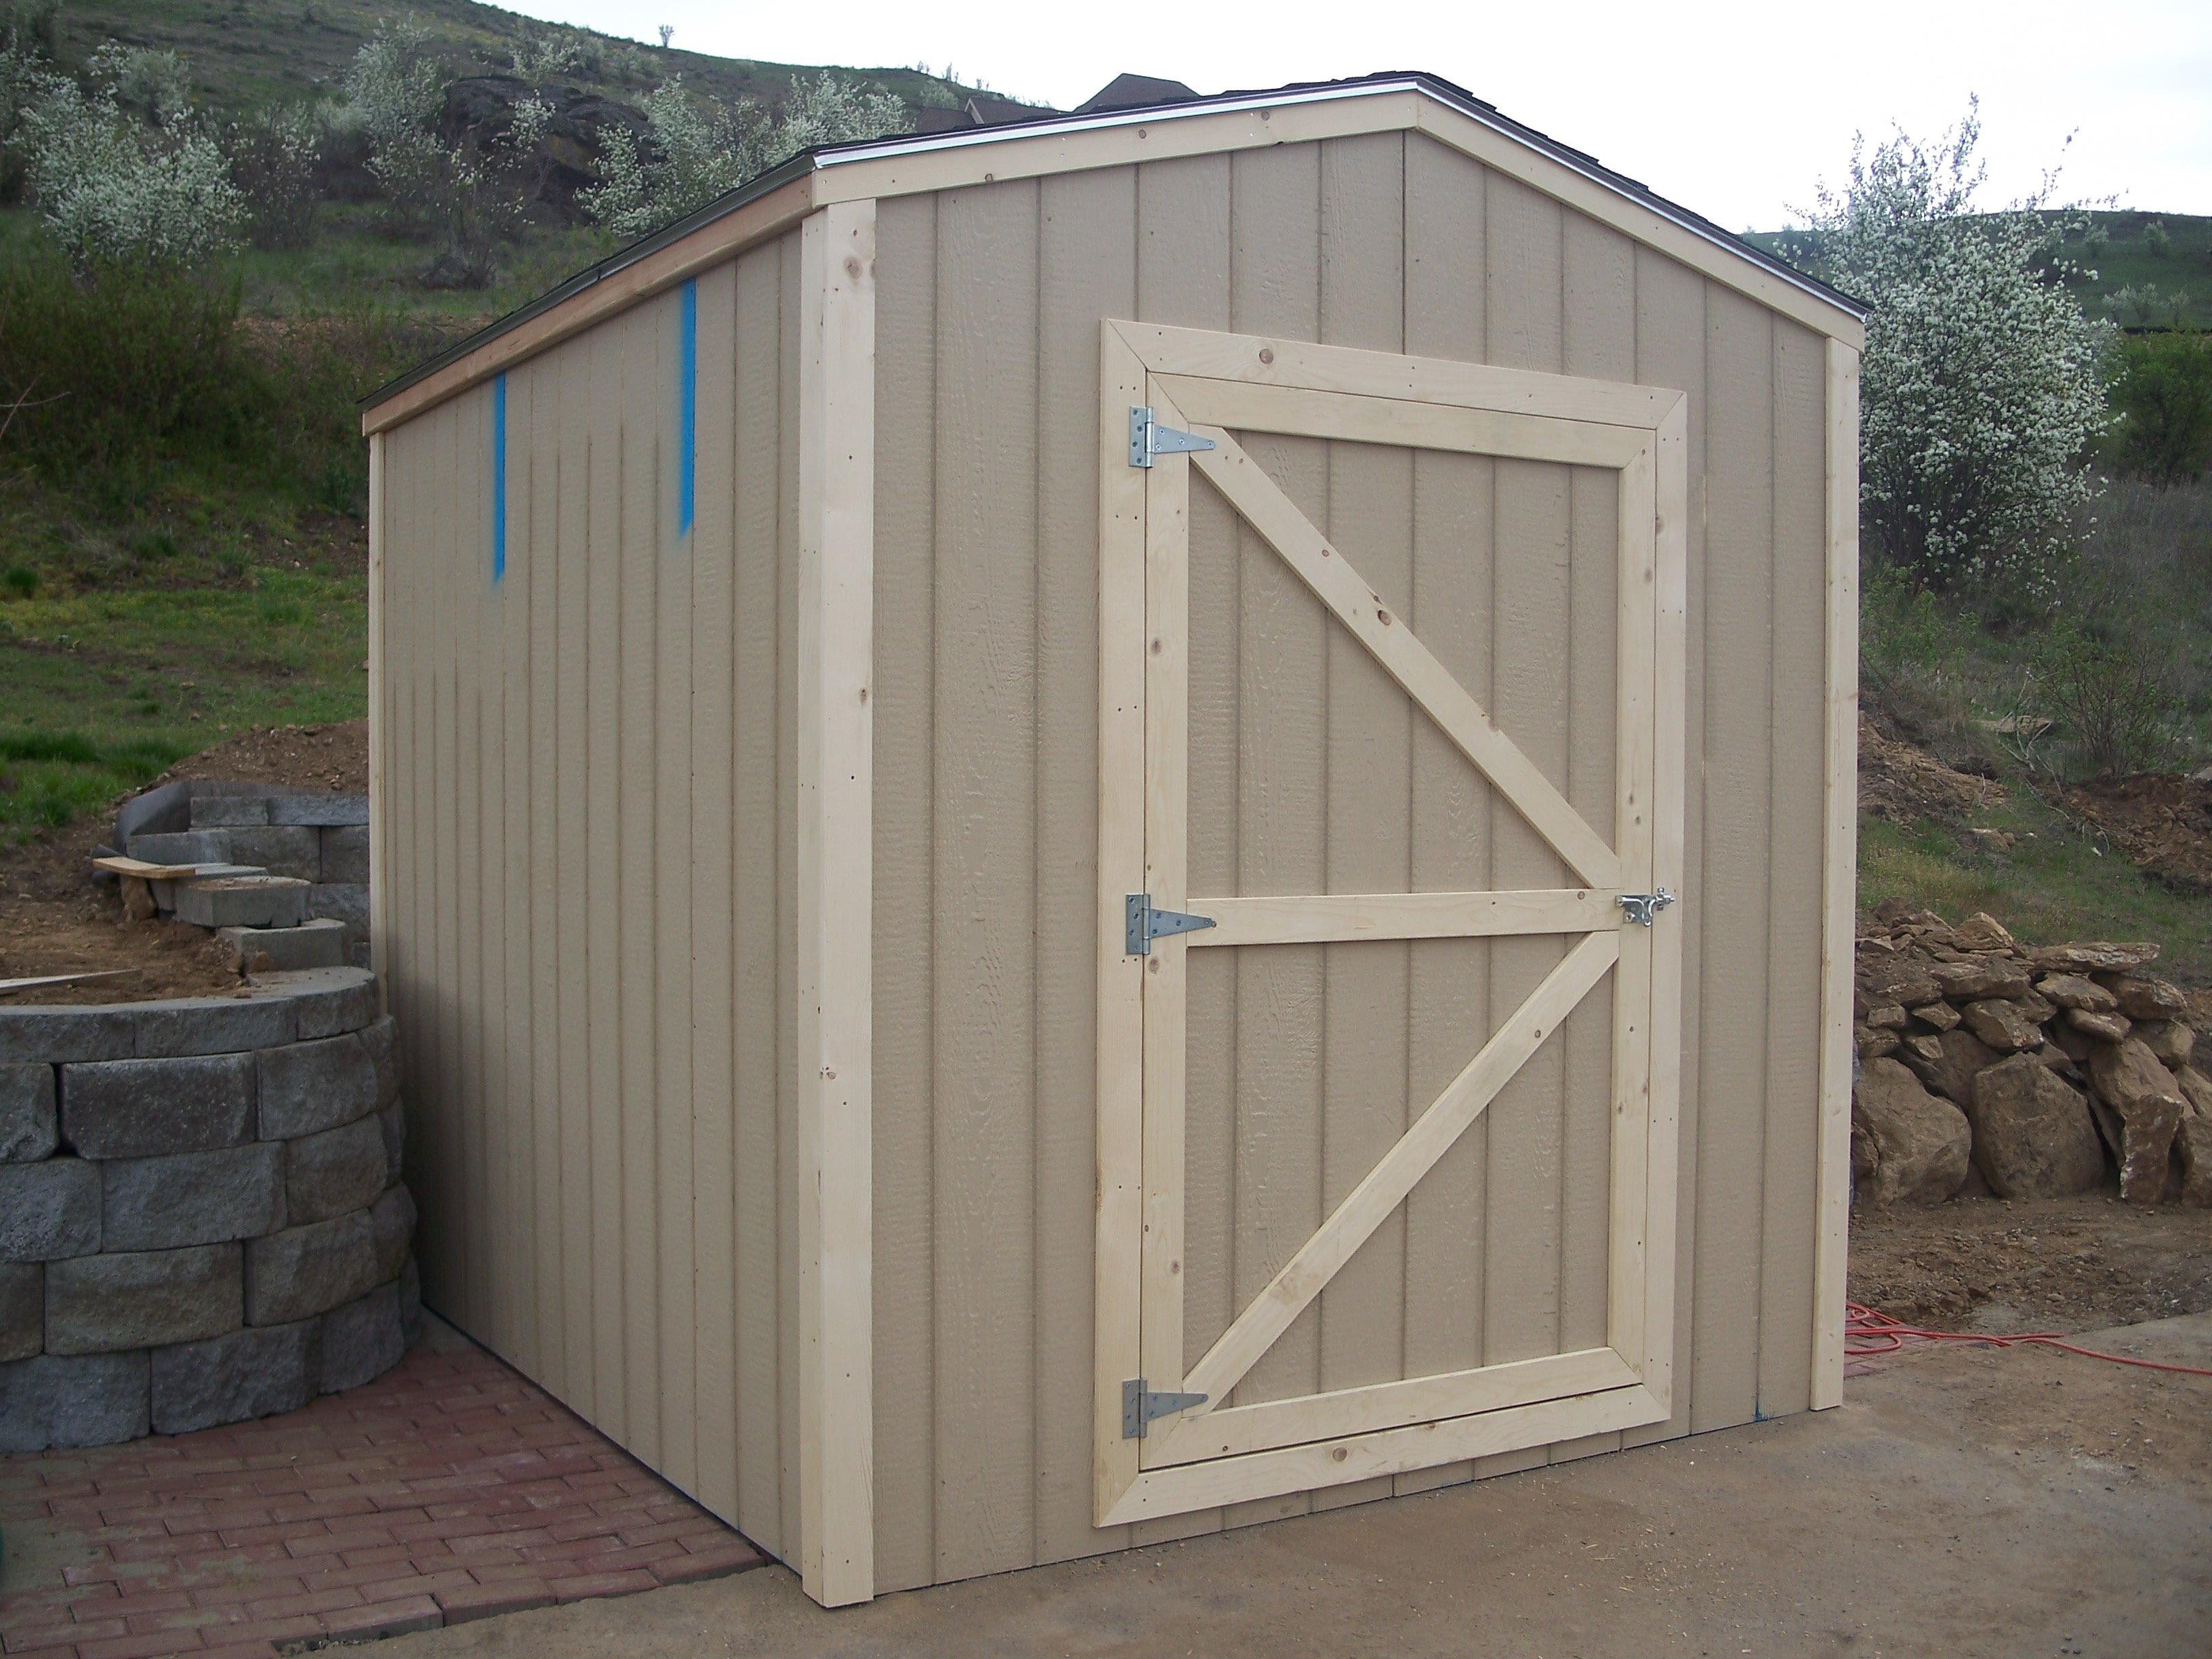 ... Replacement Wooden Shed Doors Using Shed Door Plans | Shed Blueprints